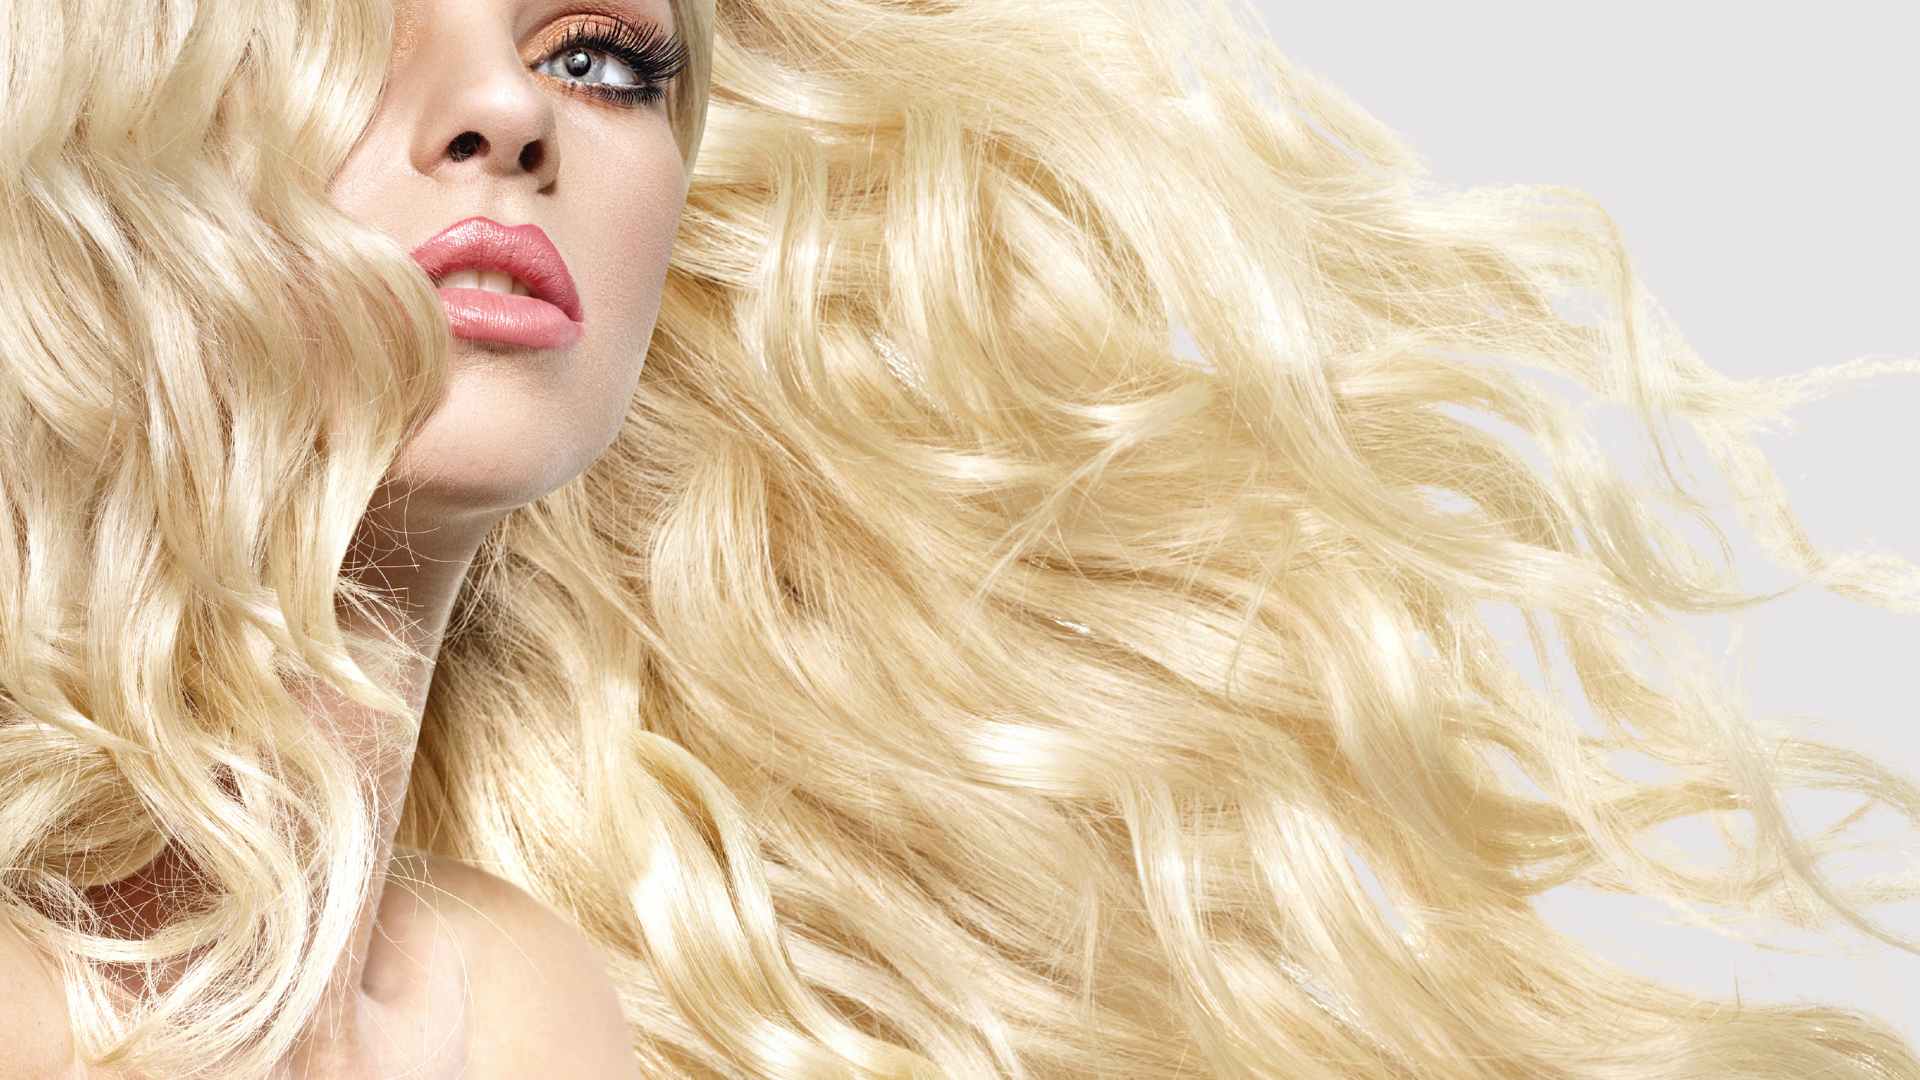 How To Moisturise Dry Hair: Female with long bleached hair